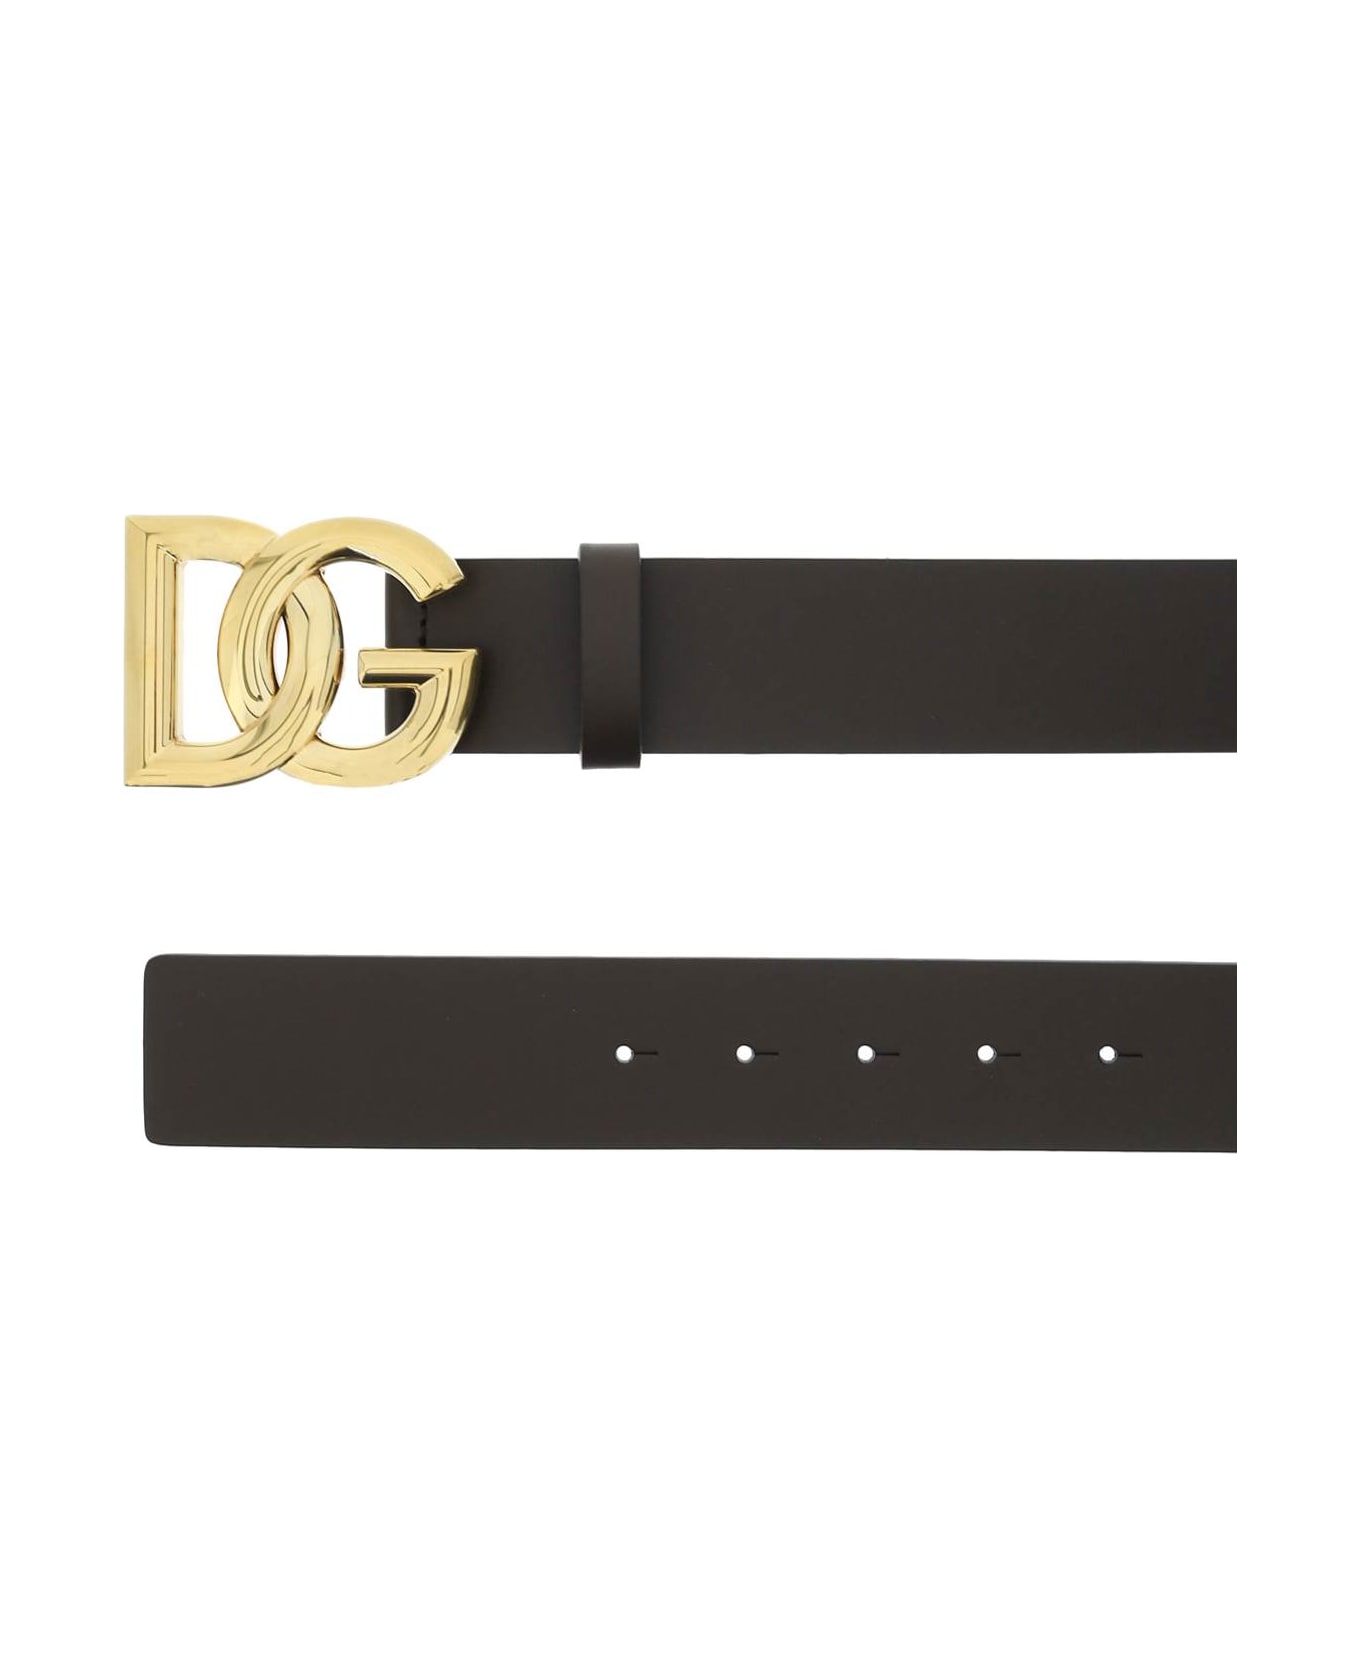 Dolce & Gabbana Lux Leather Belt With Dg Buckle - MORO ORO (Brown)